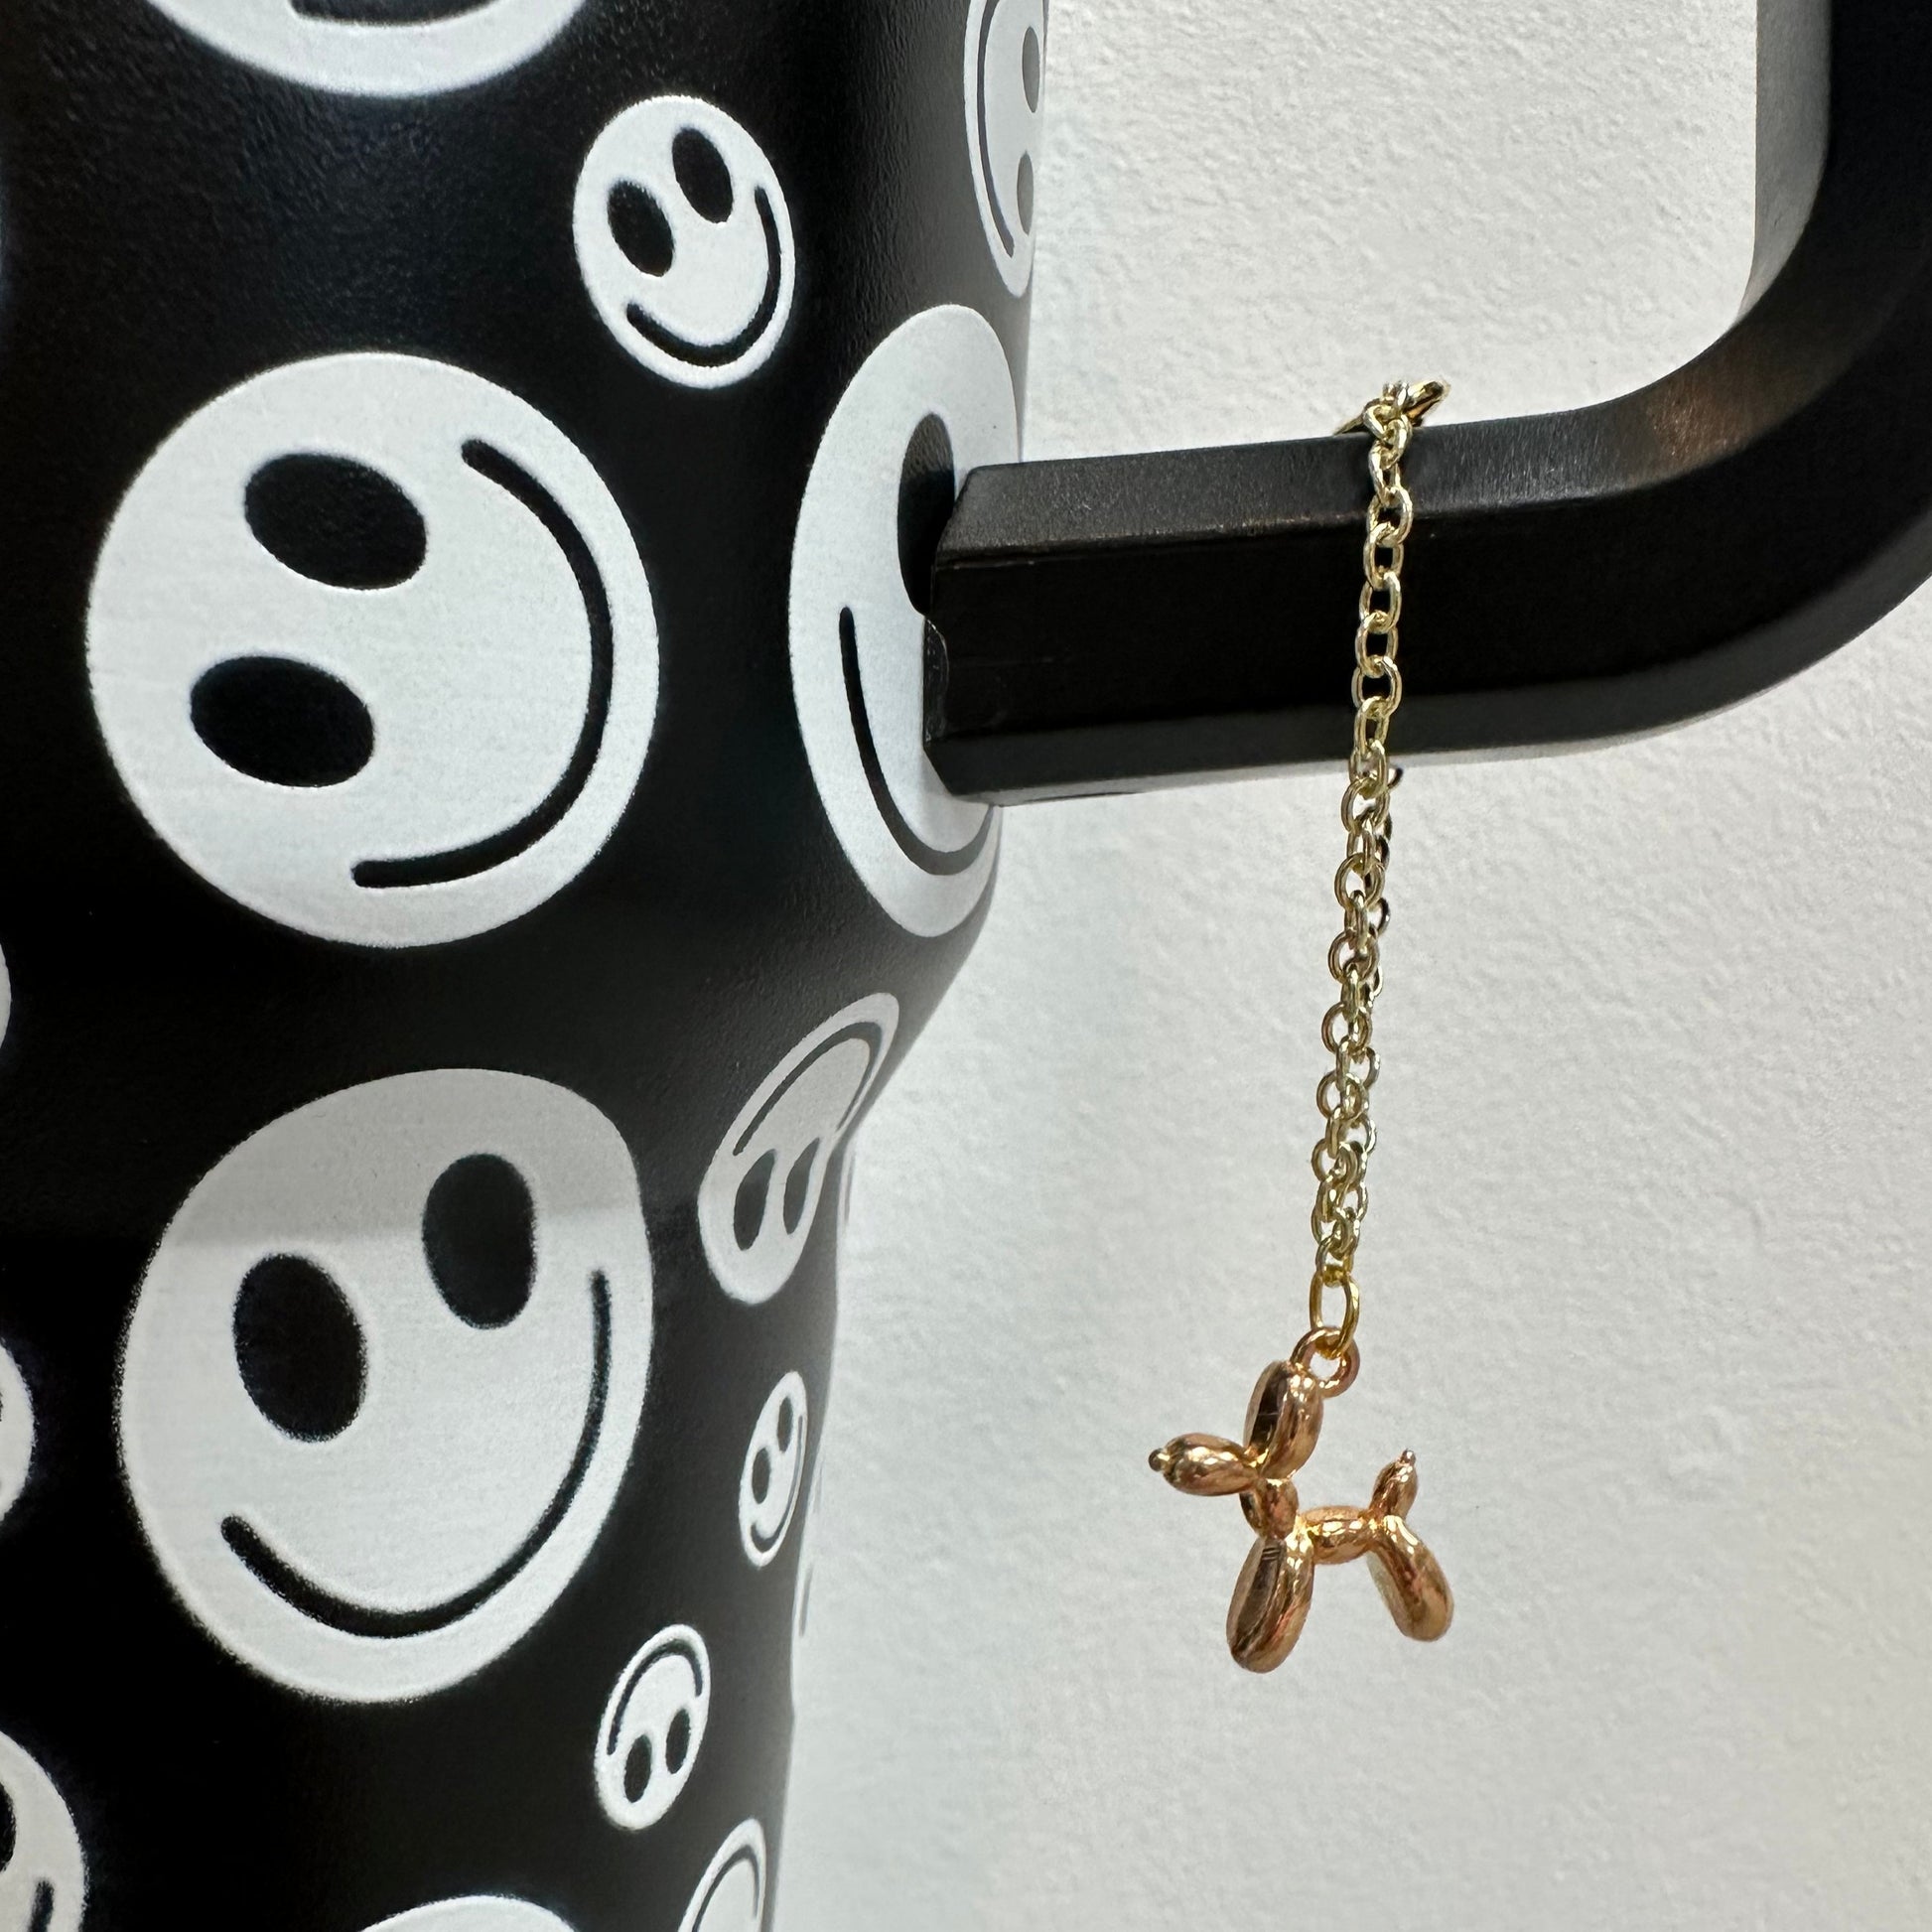 Balloon Dog Tumbler or Water Bottle Charm in Gold